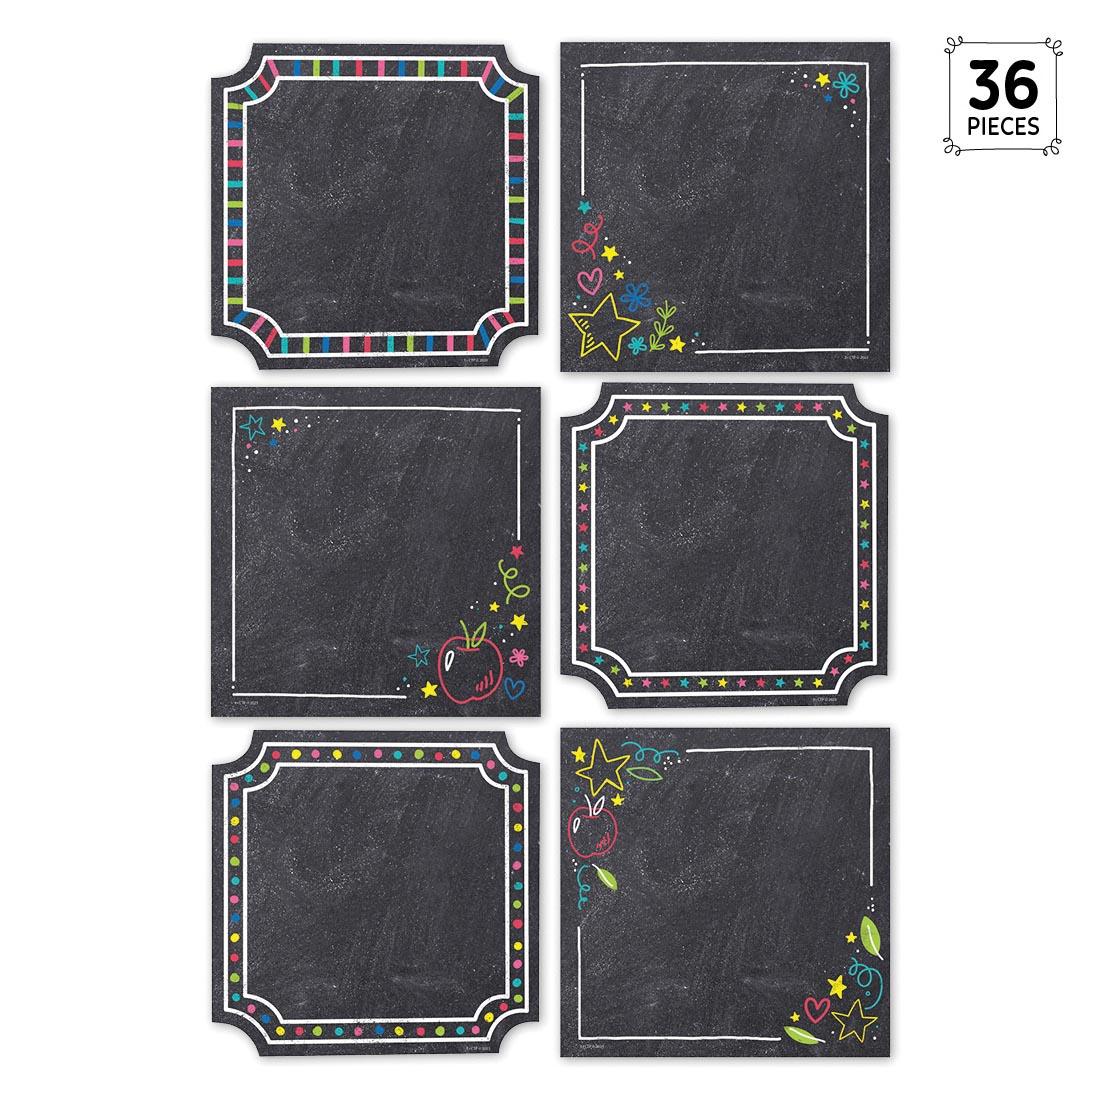 Colorful Chalk Cards 6" Designer Cut-Outs from the Chalk It Up! Collection By Creative Teaching Press with the text 36 Pieces